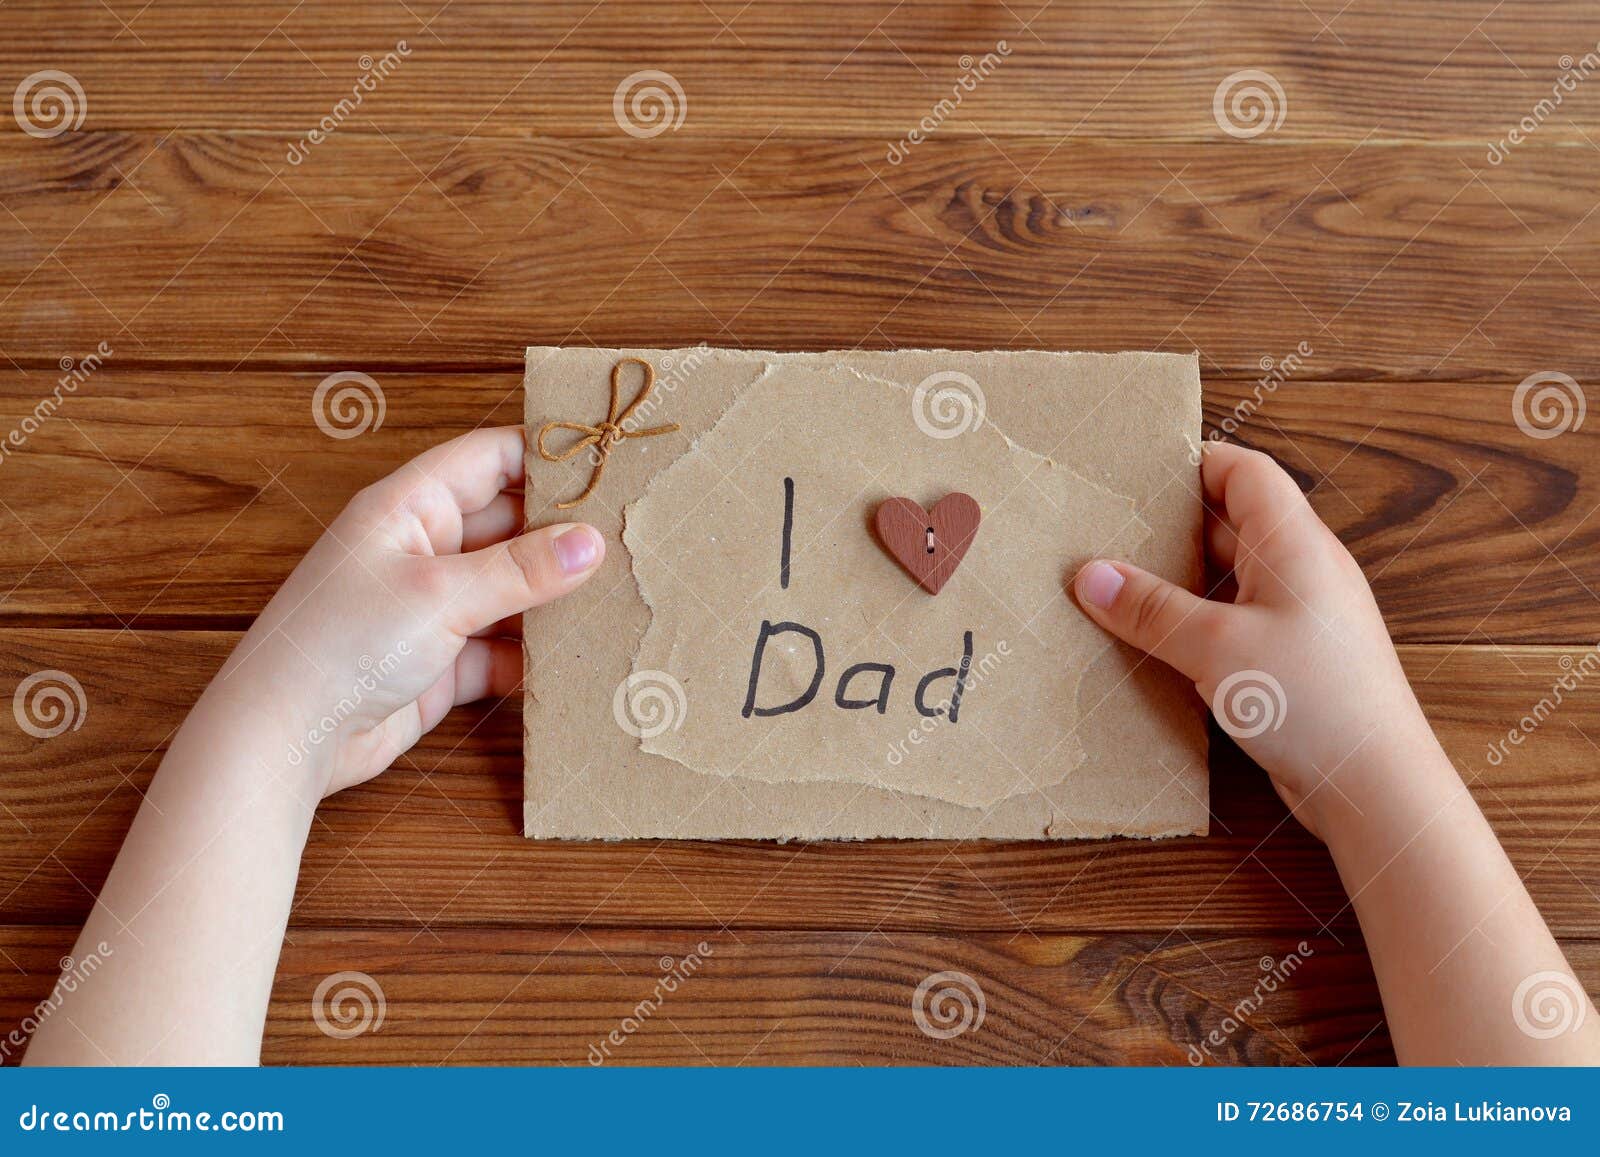 Child Holds A Birthday Card For Dad Child Holds A Greeting Card In Hands I Love Dad Stock Photo Image Of Handmade Button 72686754